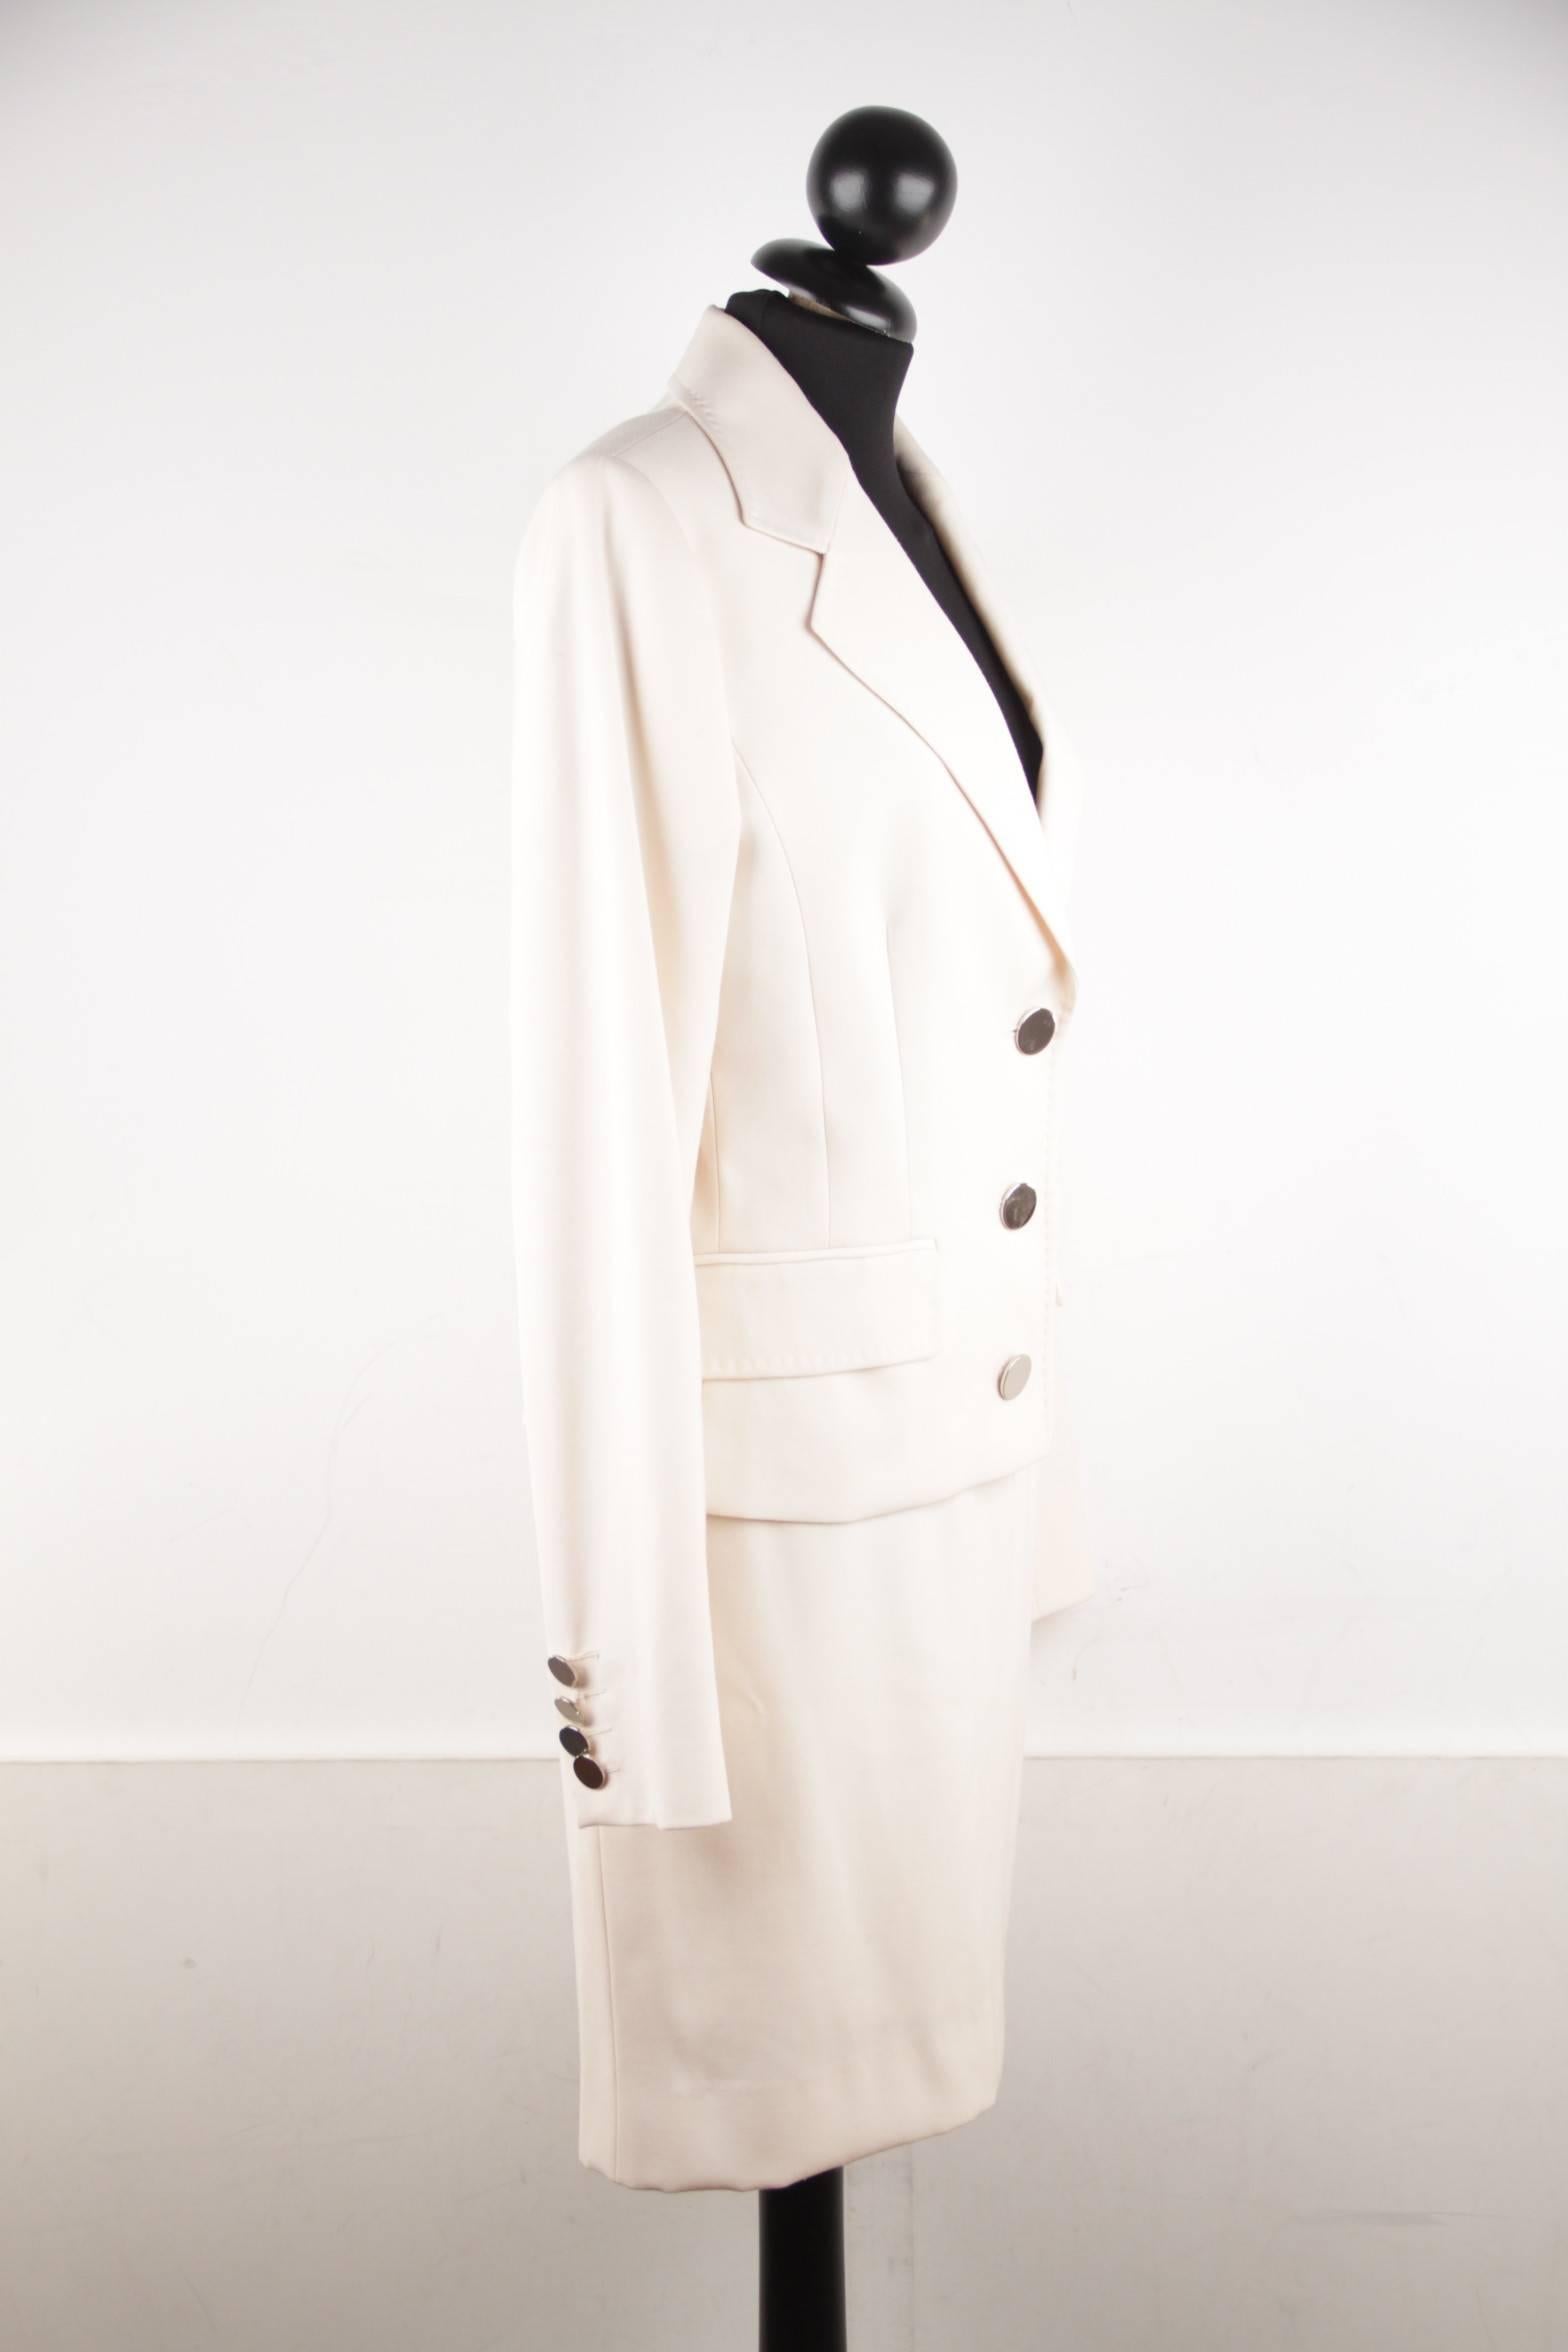  - DOLCE & GABBANA blazer and skirt suit
- White color
- Knee-lenght cut pencil skirt
- 3-button closure on the blazer
- Rear zip closure on the skirt
- Lined
- Size : 44 IT (The size shown for this item is the size indicated by the designer